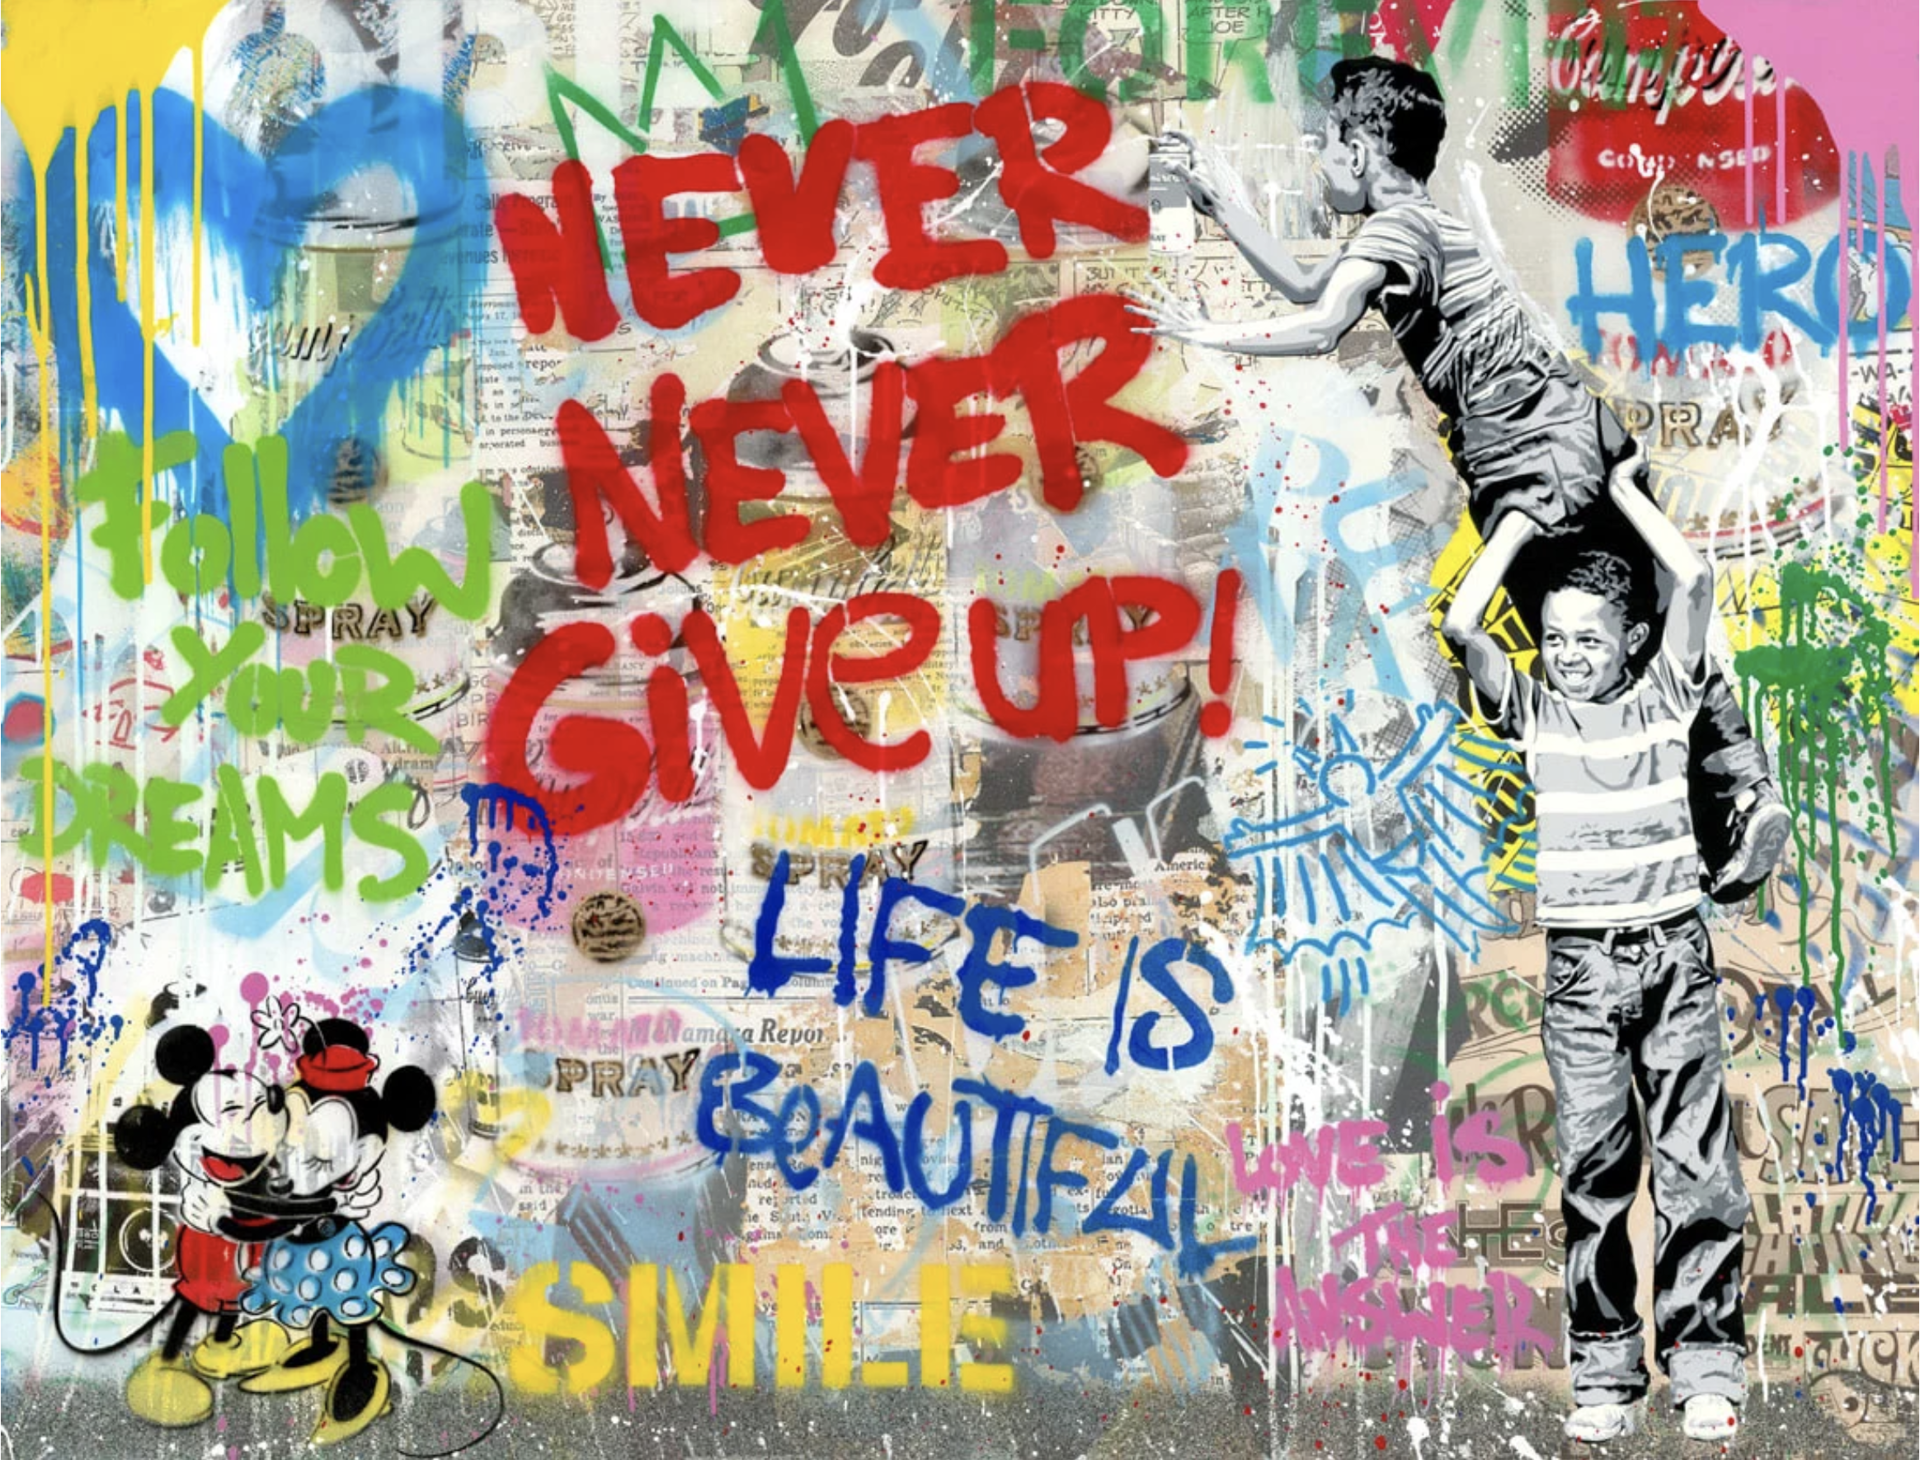 Never, Never Give Up! by Mr Brainwash